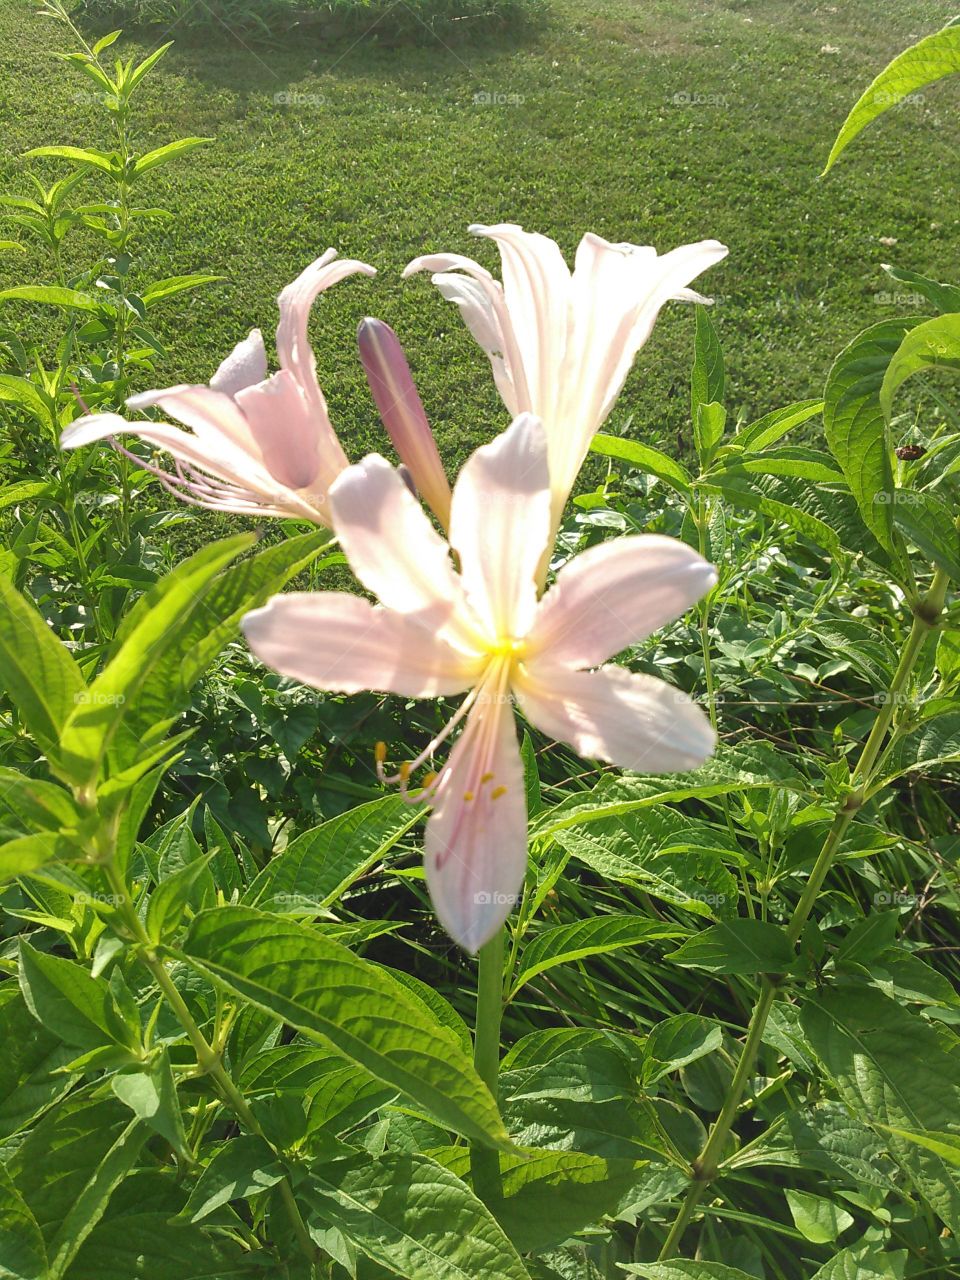 "Surprise Lillies."
As the common name suggests I was pretty surprised to find this flower randomly one day after walking out the front door, in my untended flowerbed no less